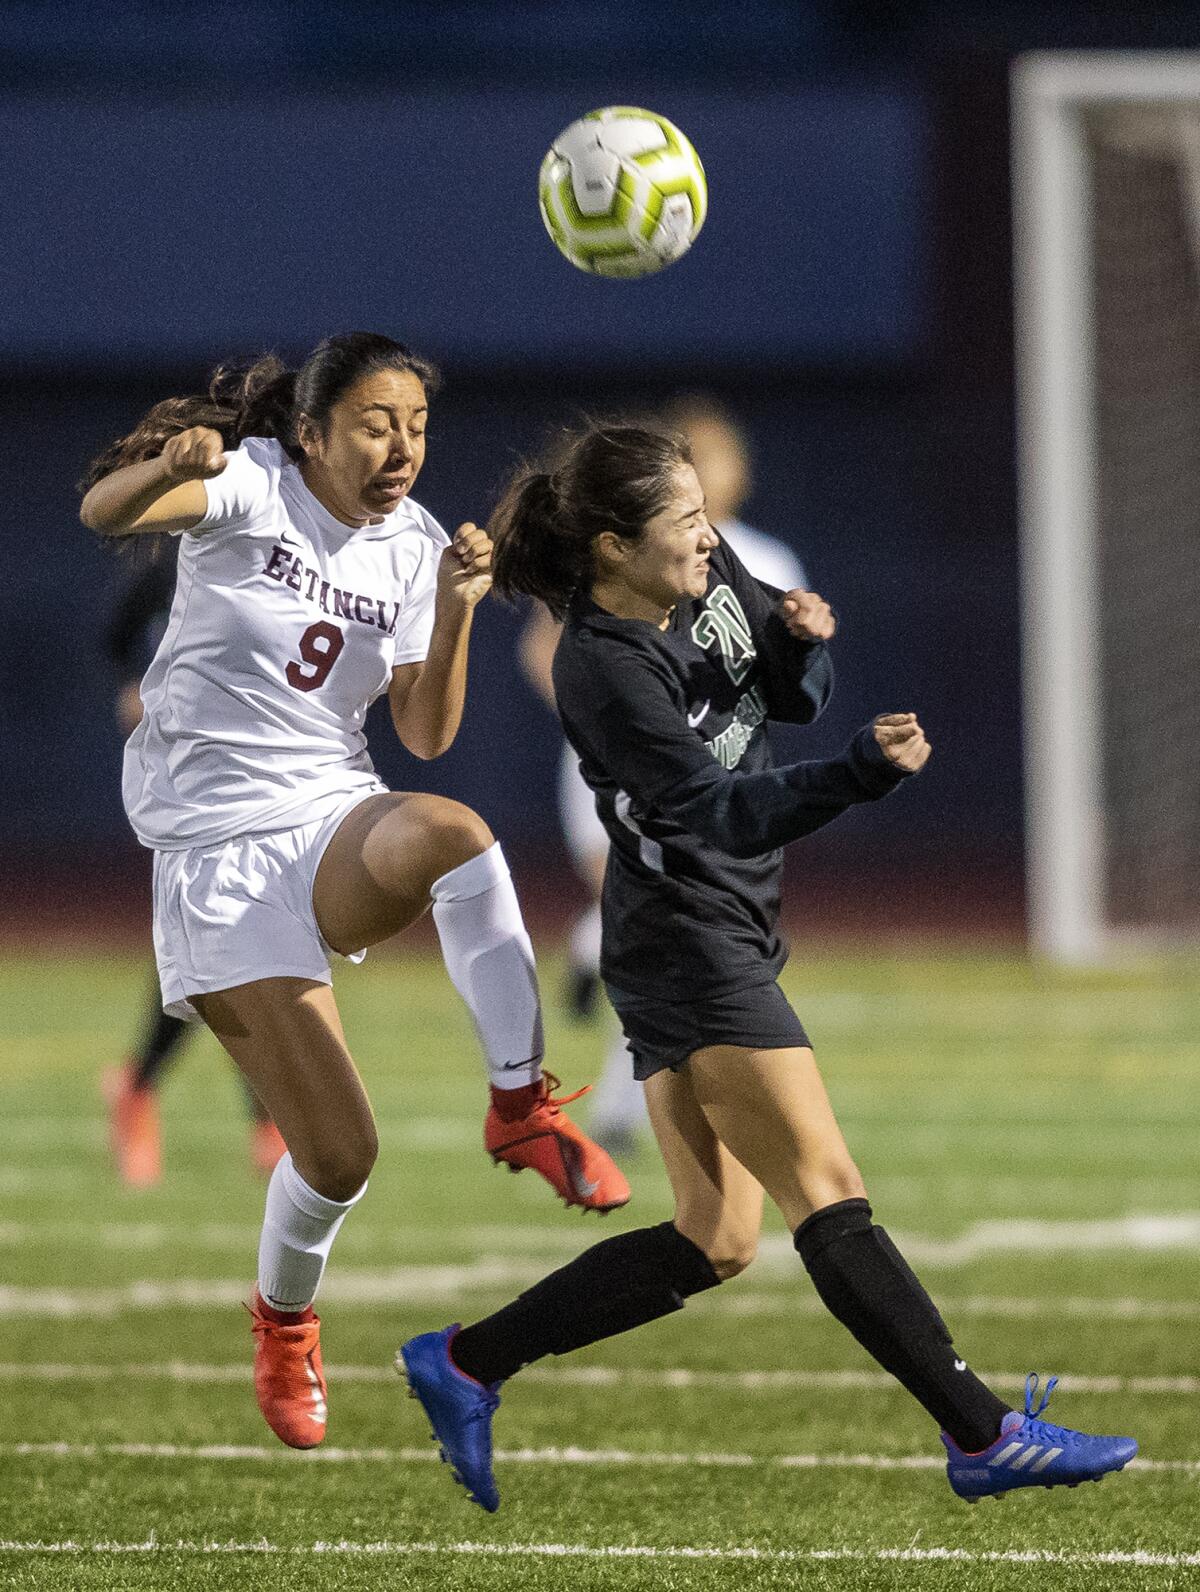 Costa Mesa's Vanessa Carrillo, right, goes up for a header against Estancia's Desiree Mendoza during an Orange Coast League match on Jan. 14.